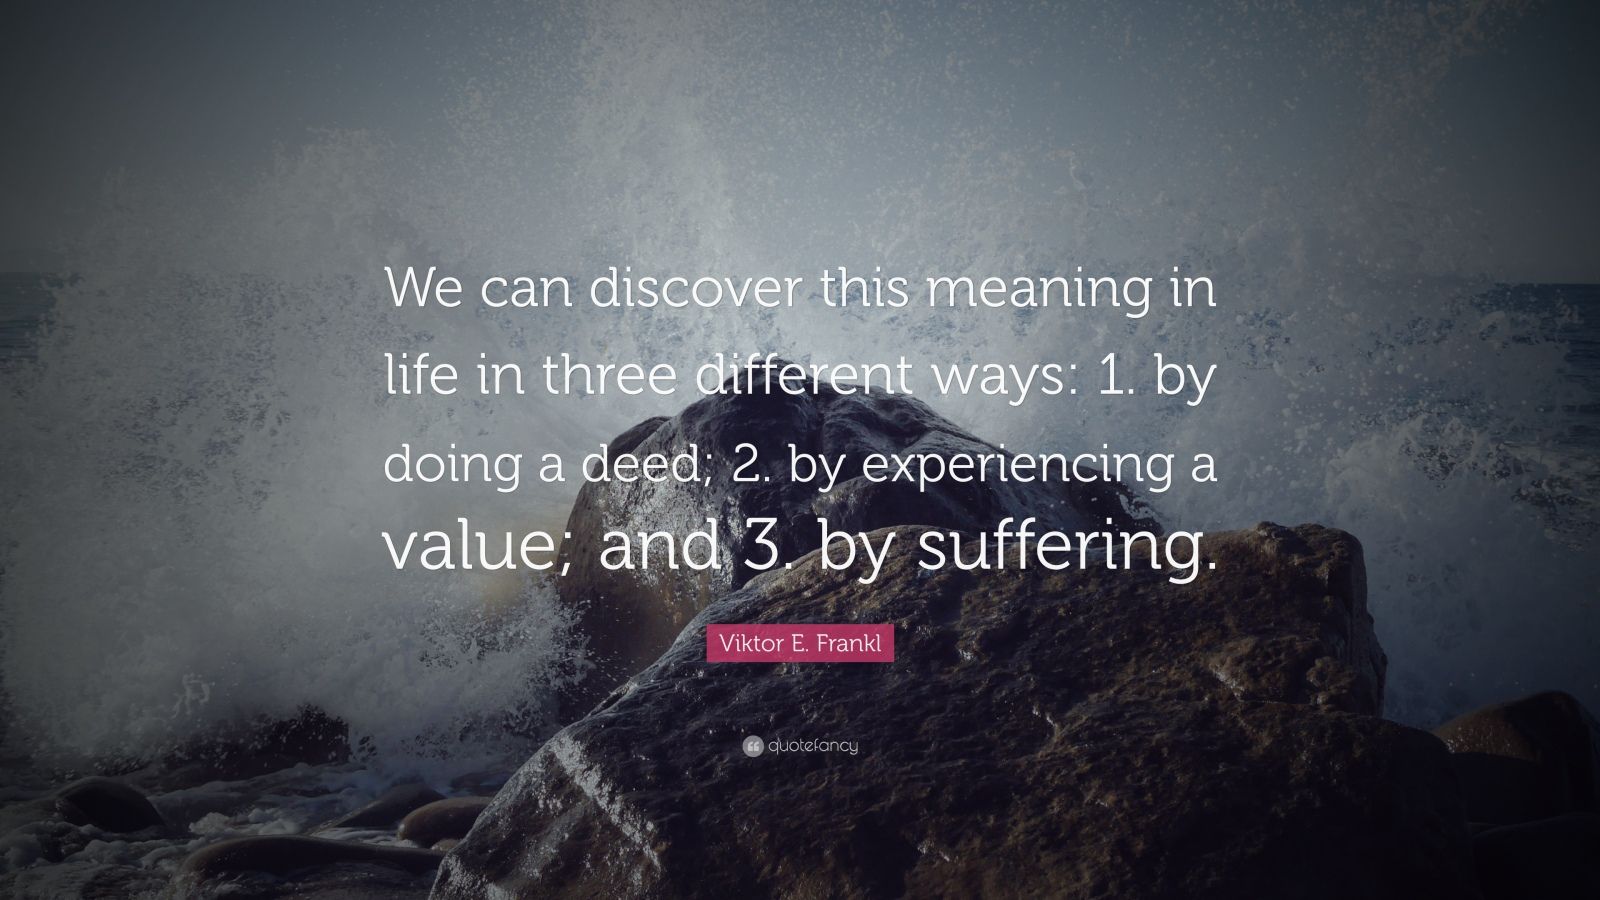 Viktor E Frankl Quote “We can discover this meaning in life in three